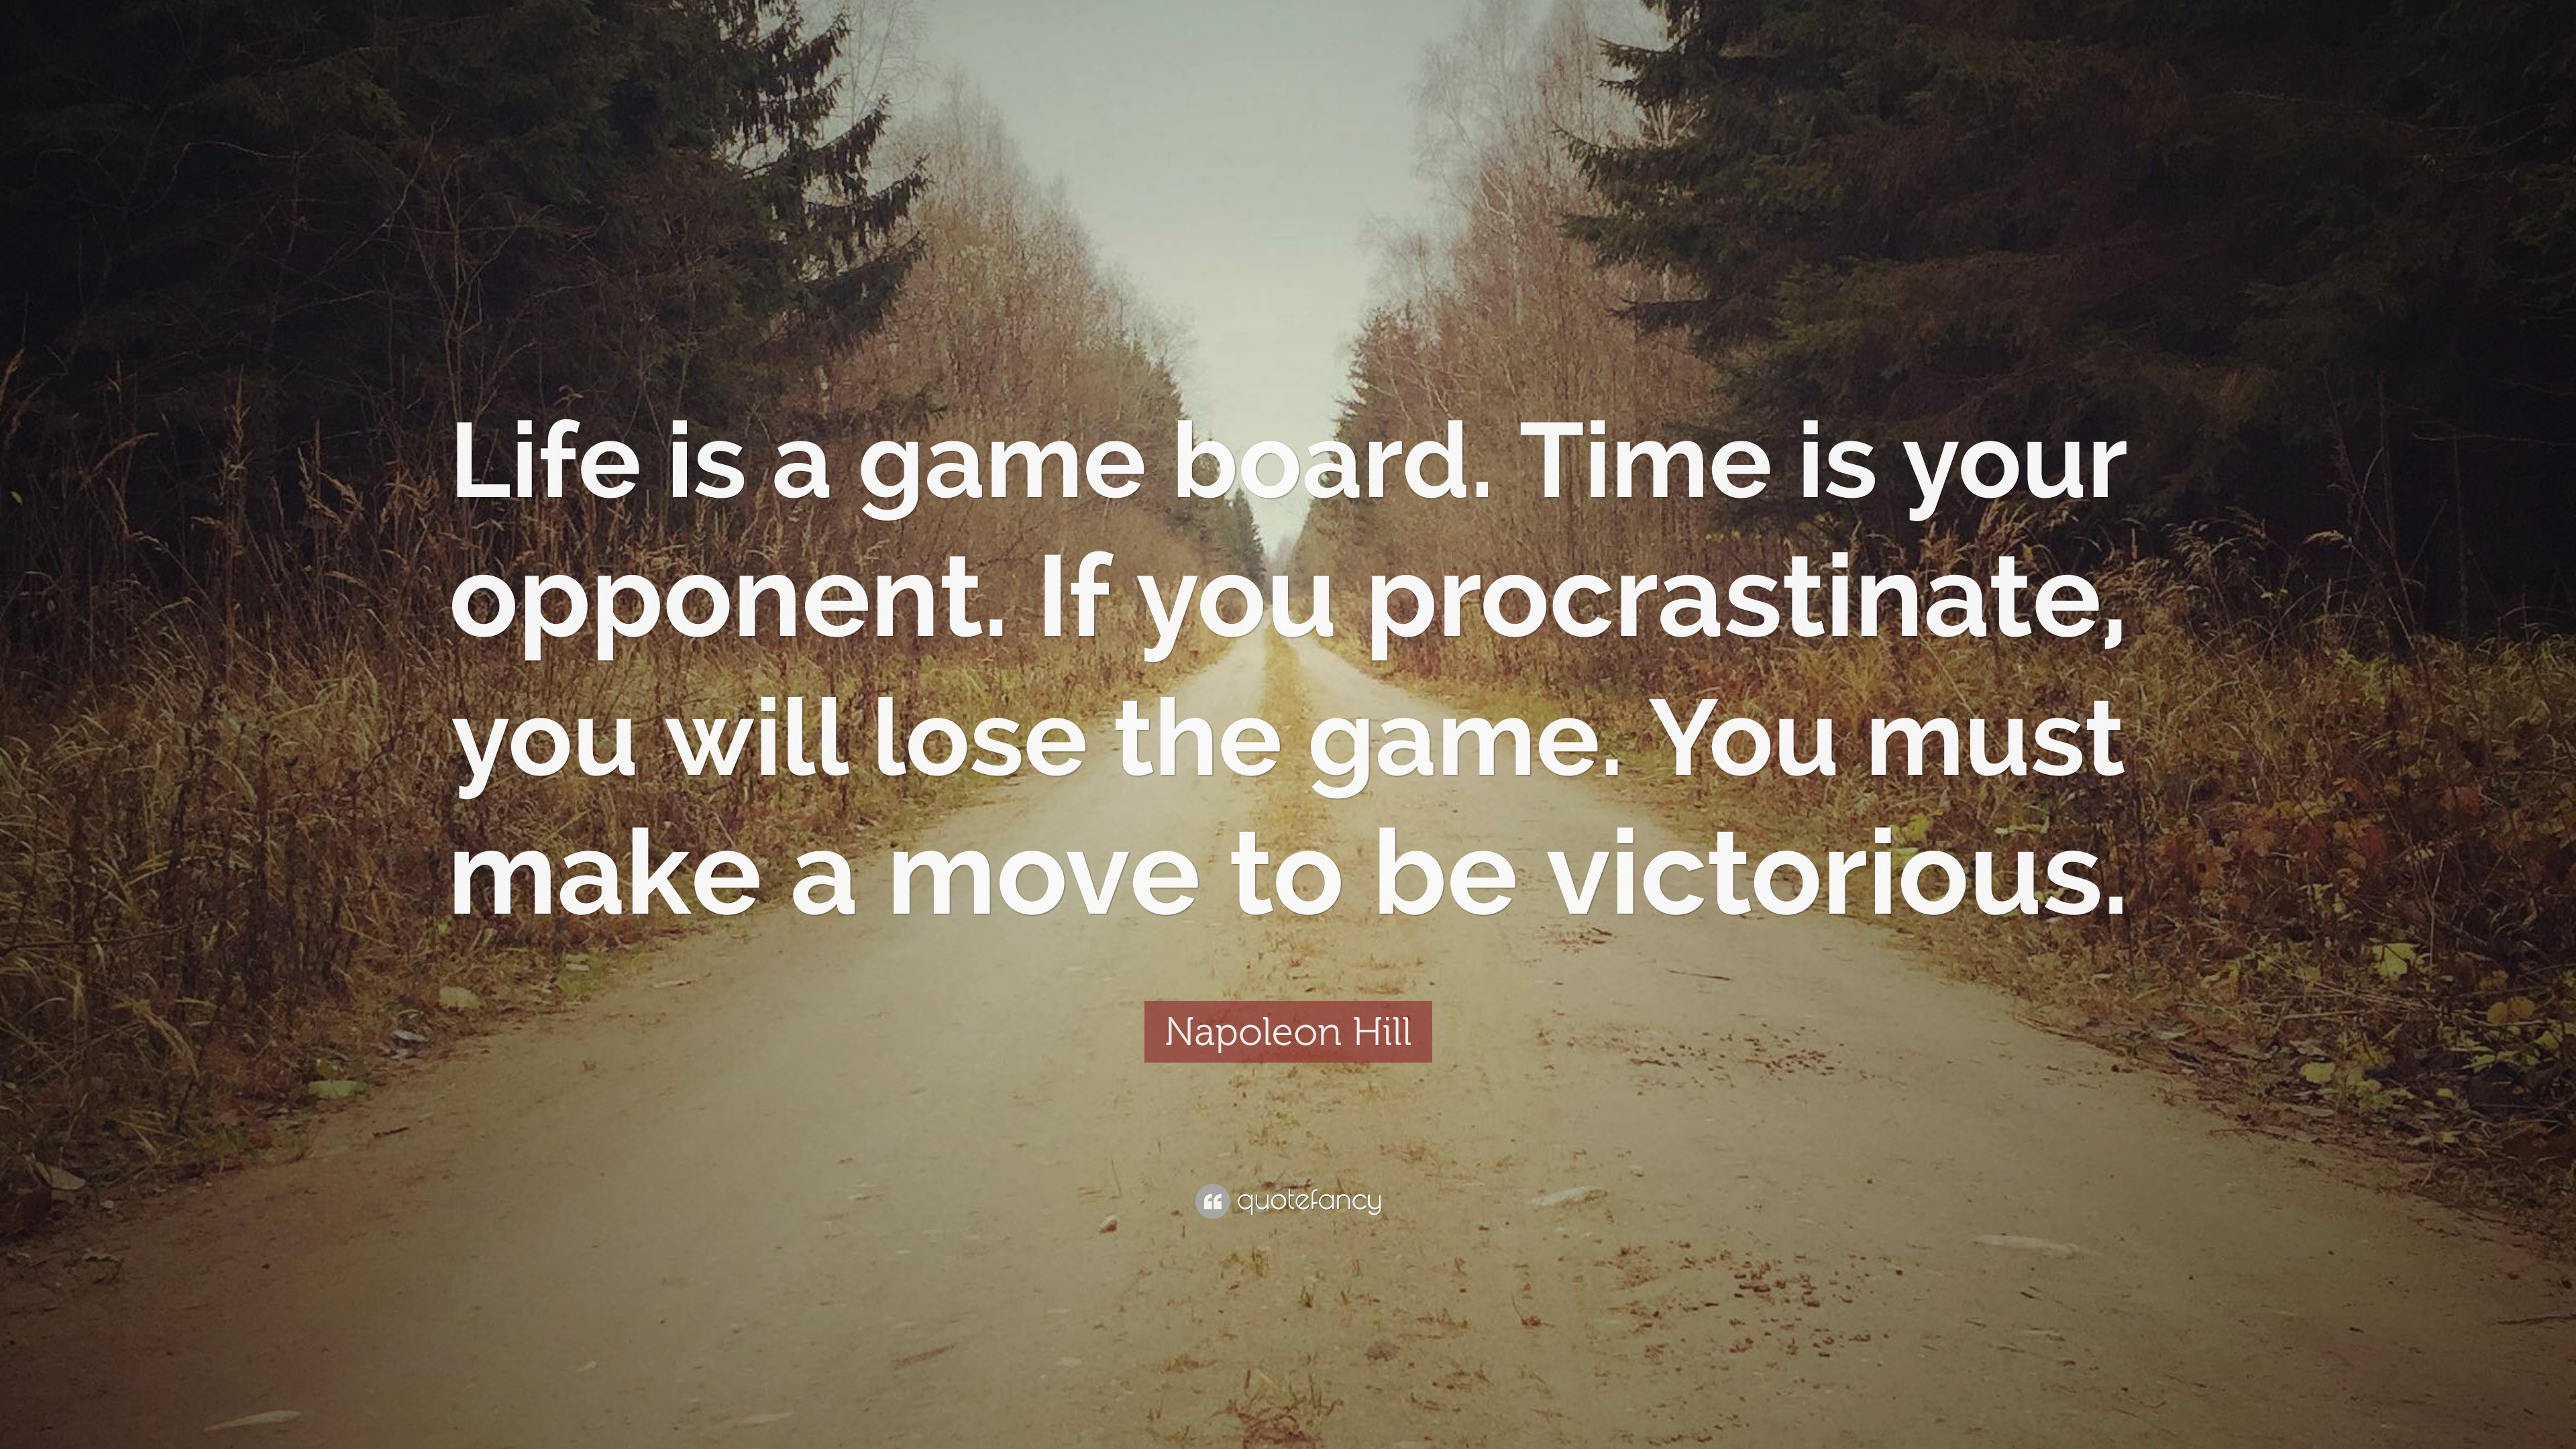 the game of life quotes